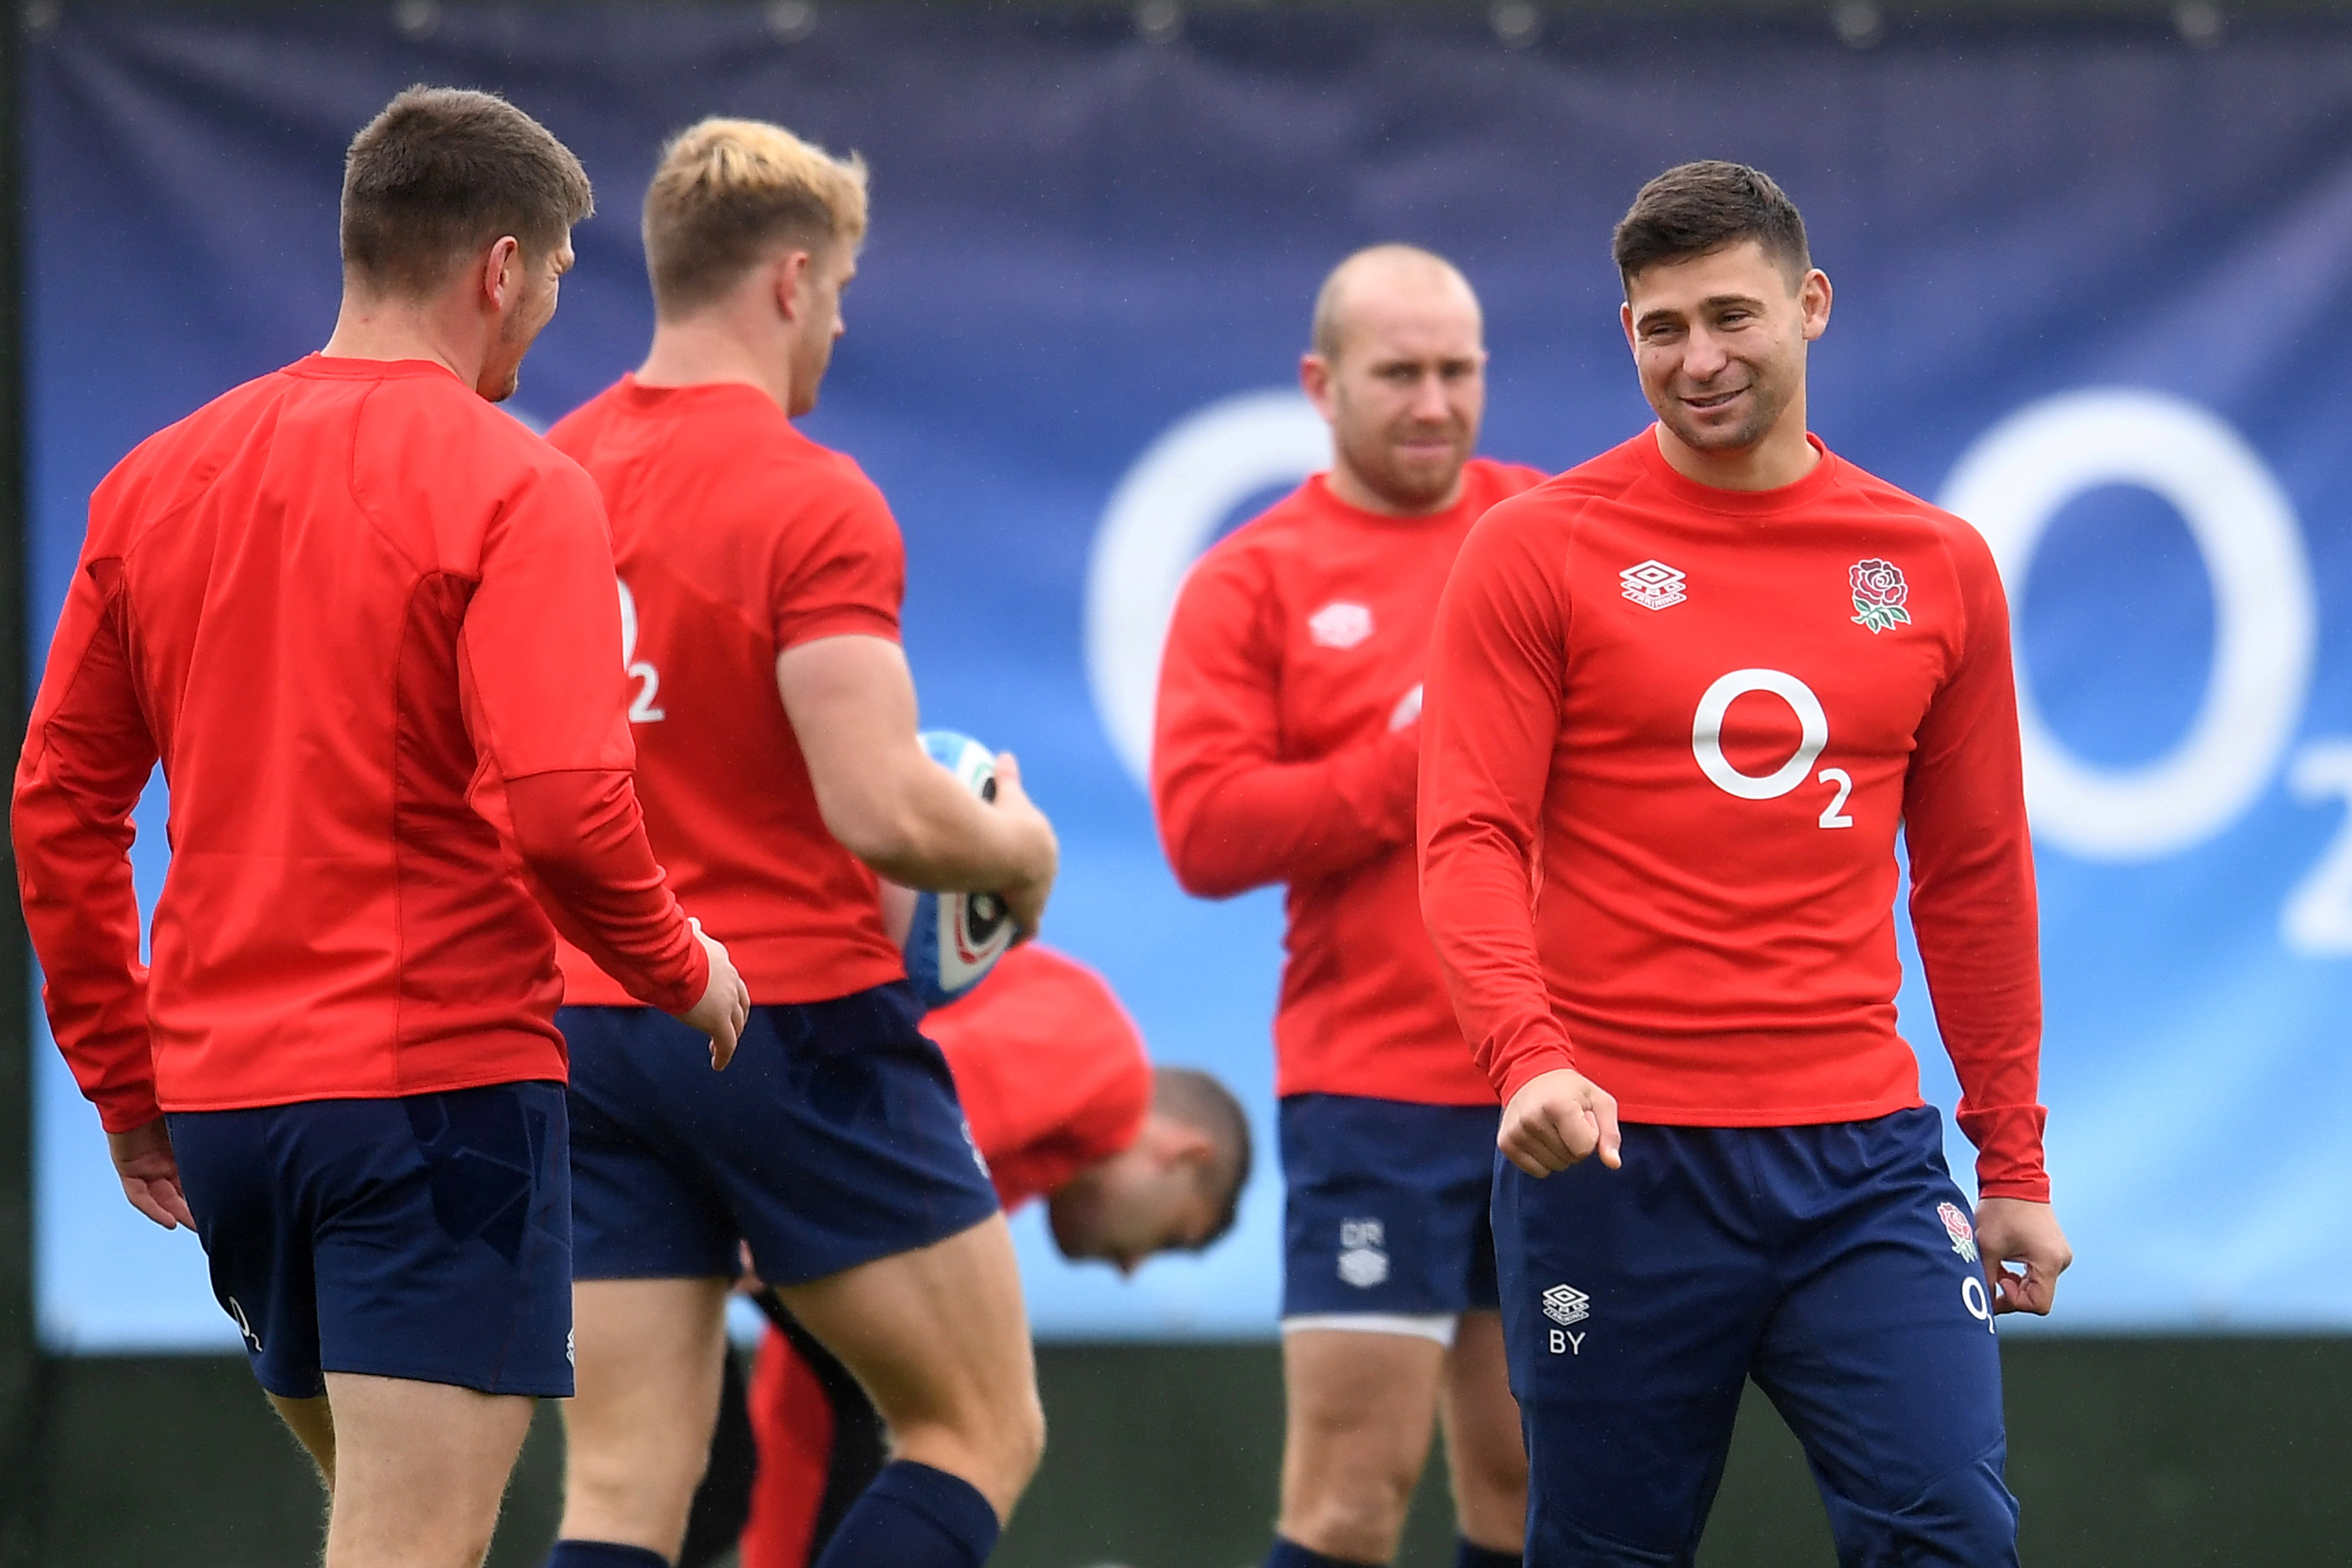 Ben Youngs will make his 100h appearance for England this weekend against Italy